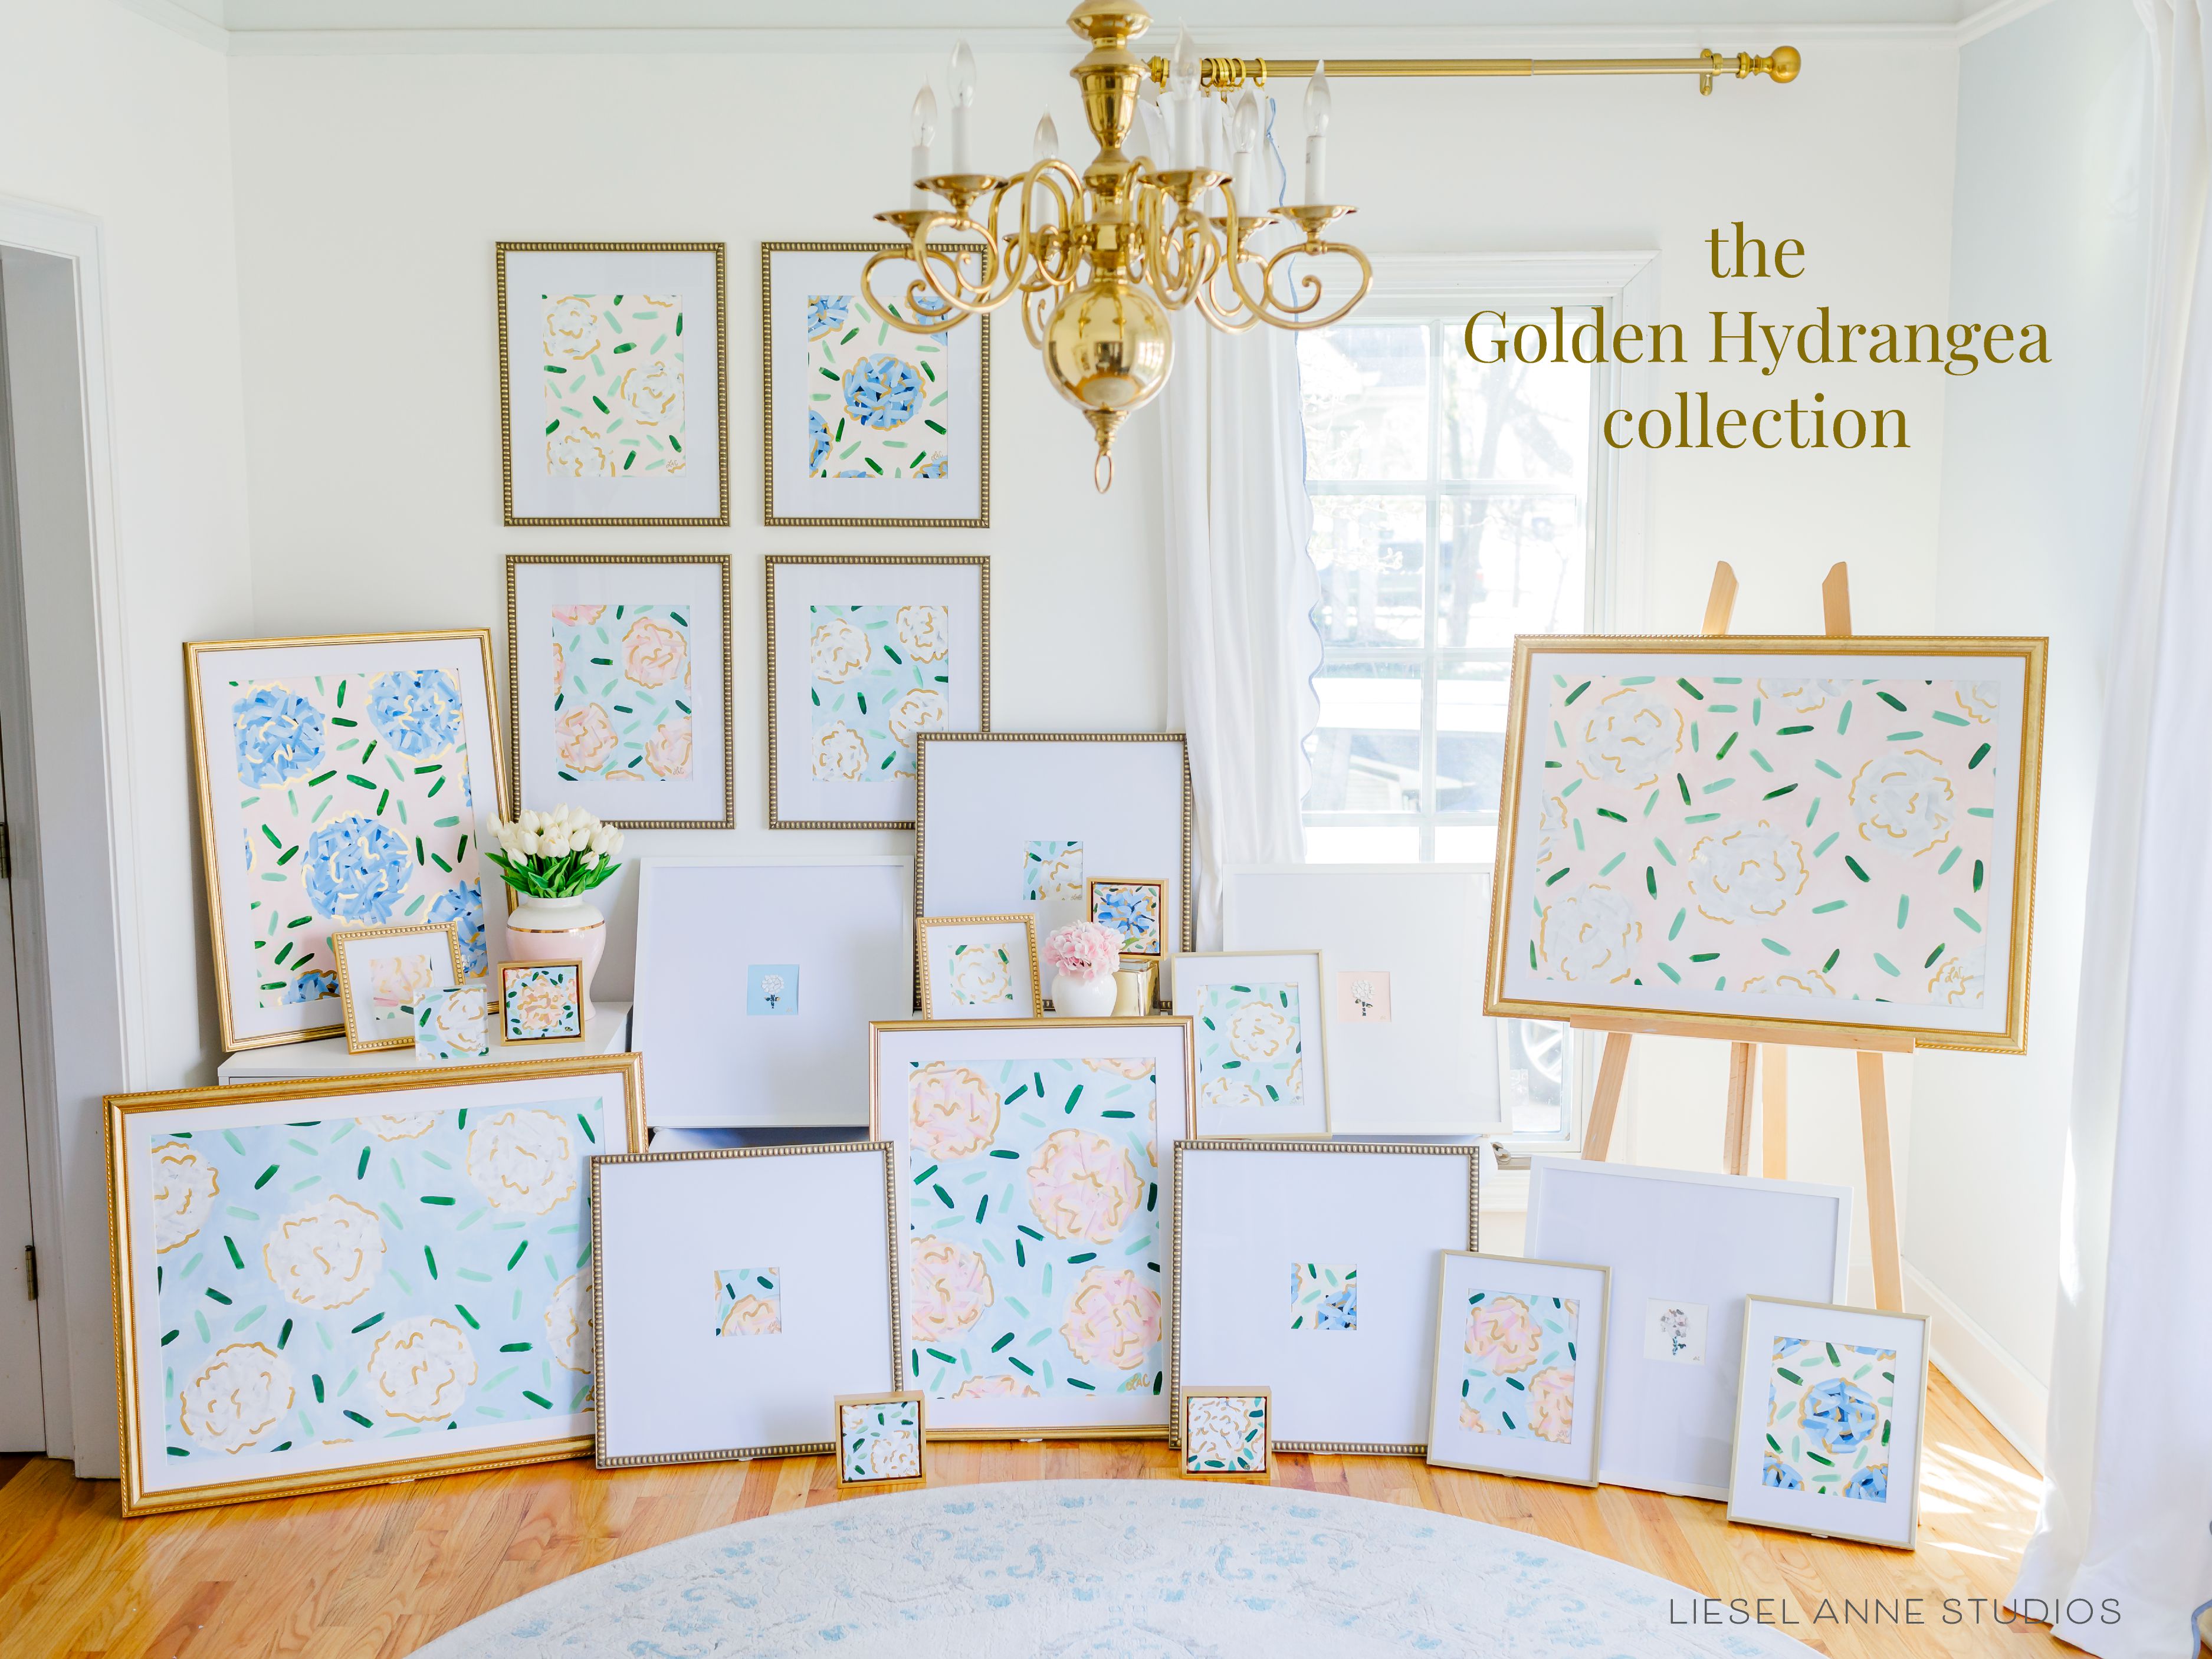 Golden Hydrangea Mini | Blush & Blue XVIII-Original artwork measures 5"x5" | Framed in gold wood floater frame | Hand-Painted with gouache on stretched canvas | Features our signature Golden Hydrangea design with a light blue base, white hydrangeas and shimmery gold accents | Initialed in gold by the Liesel Anne (the artist) on the front and signed and dated on the back-The Singing Little Bird